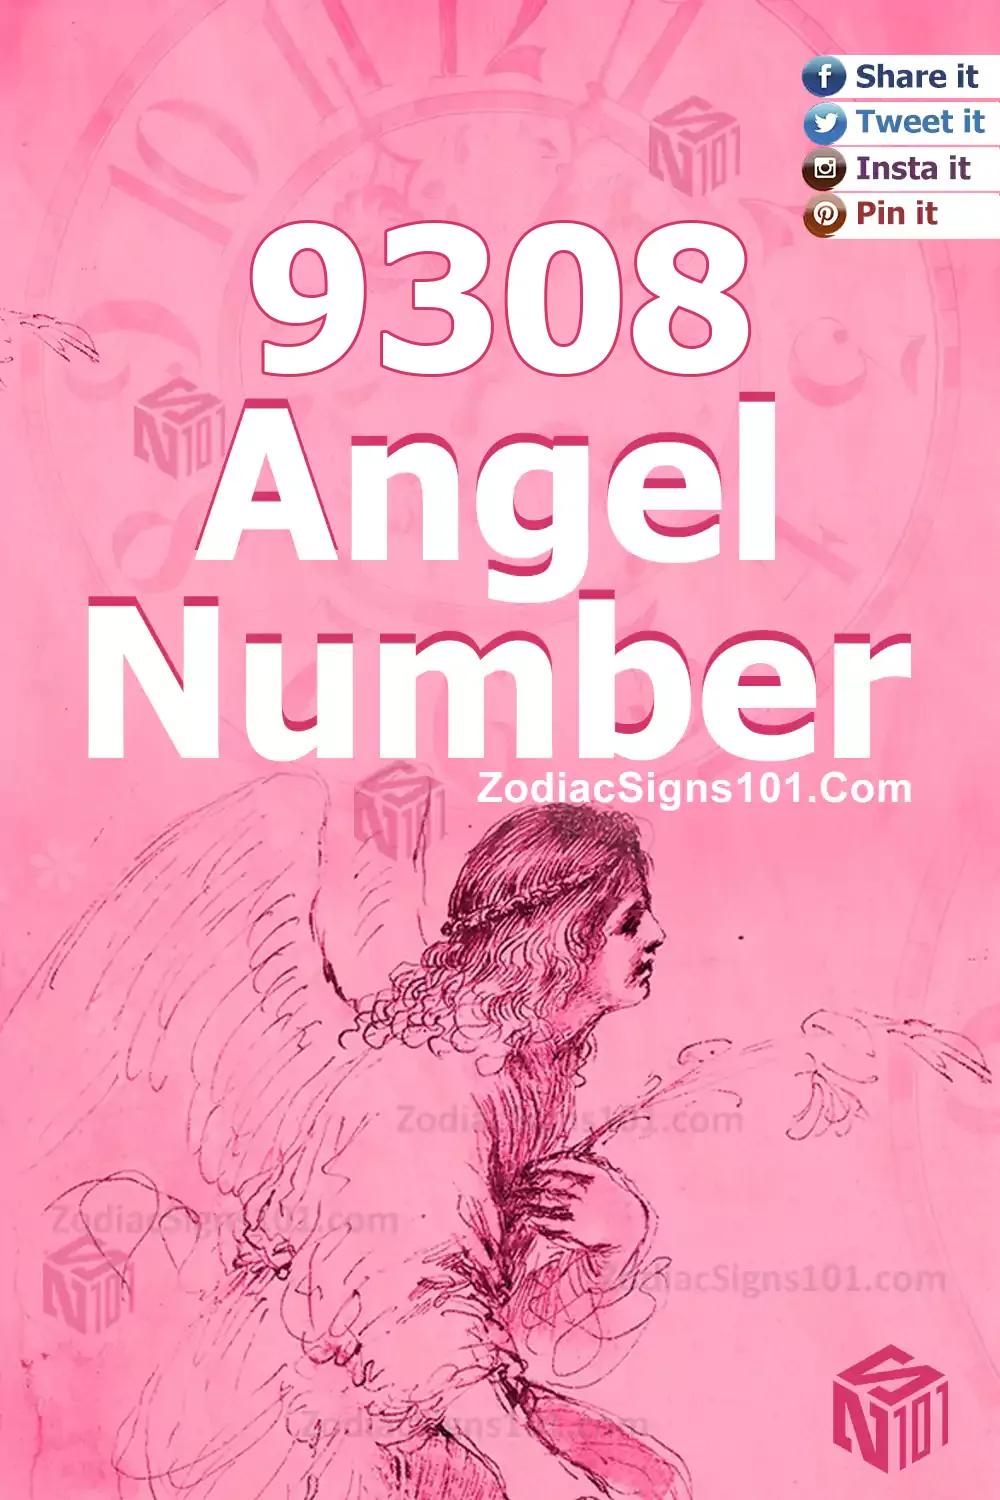 9308 Angel Number Meaning